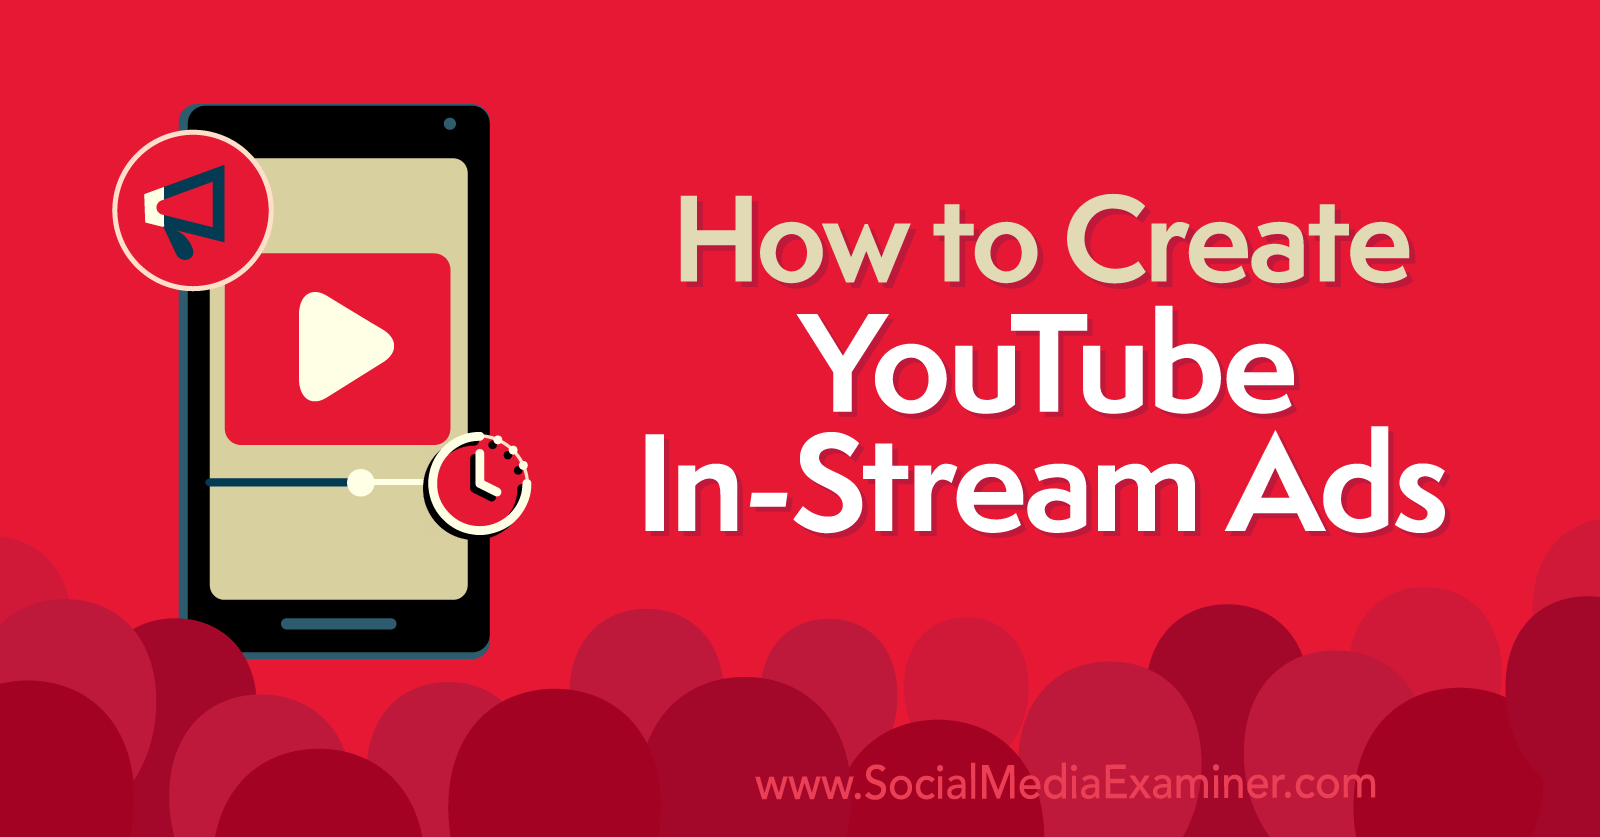 How to Create YouTube In-Stream Ads by Anna Sonnenberg on Social Media Examiner.